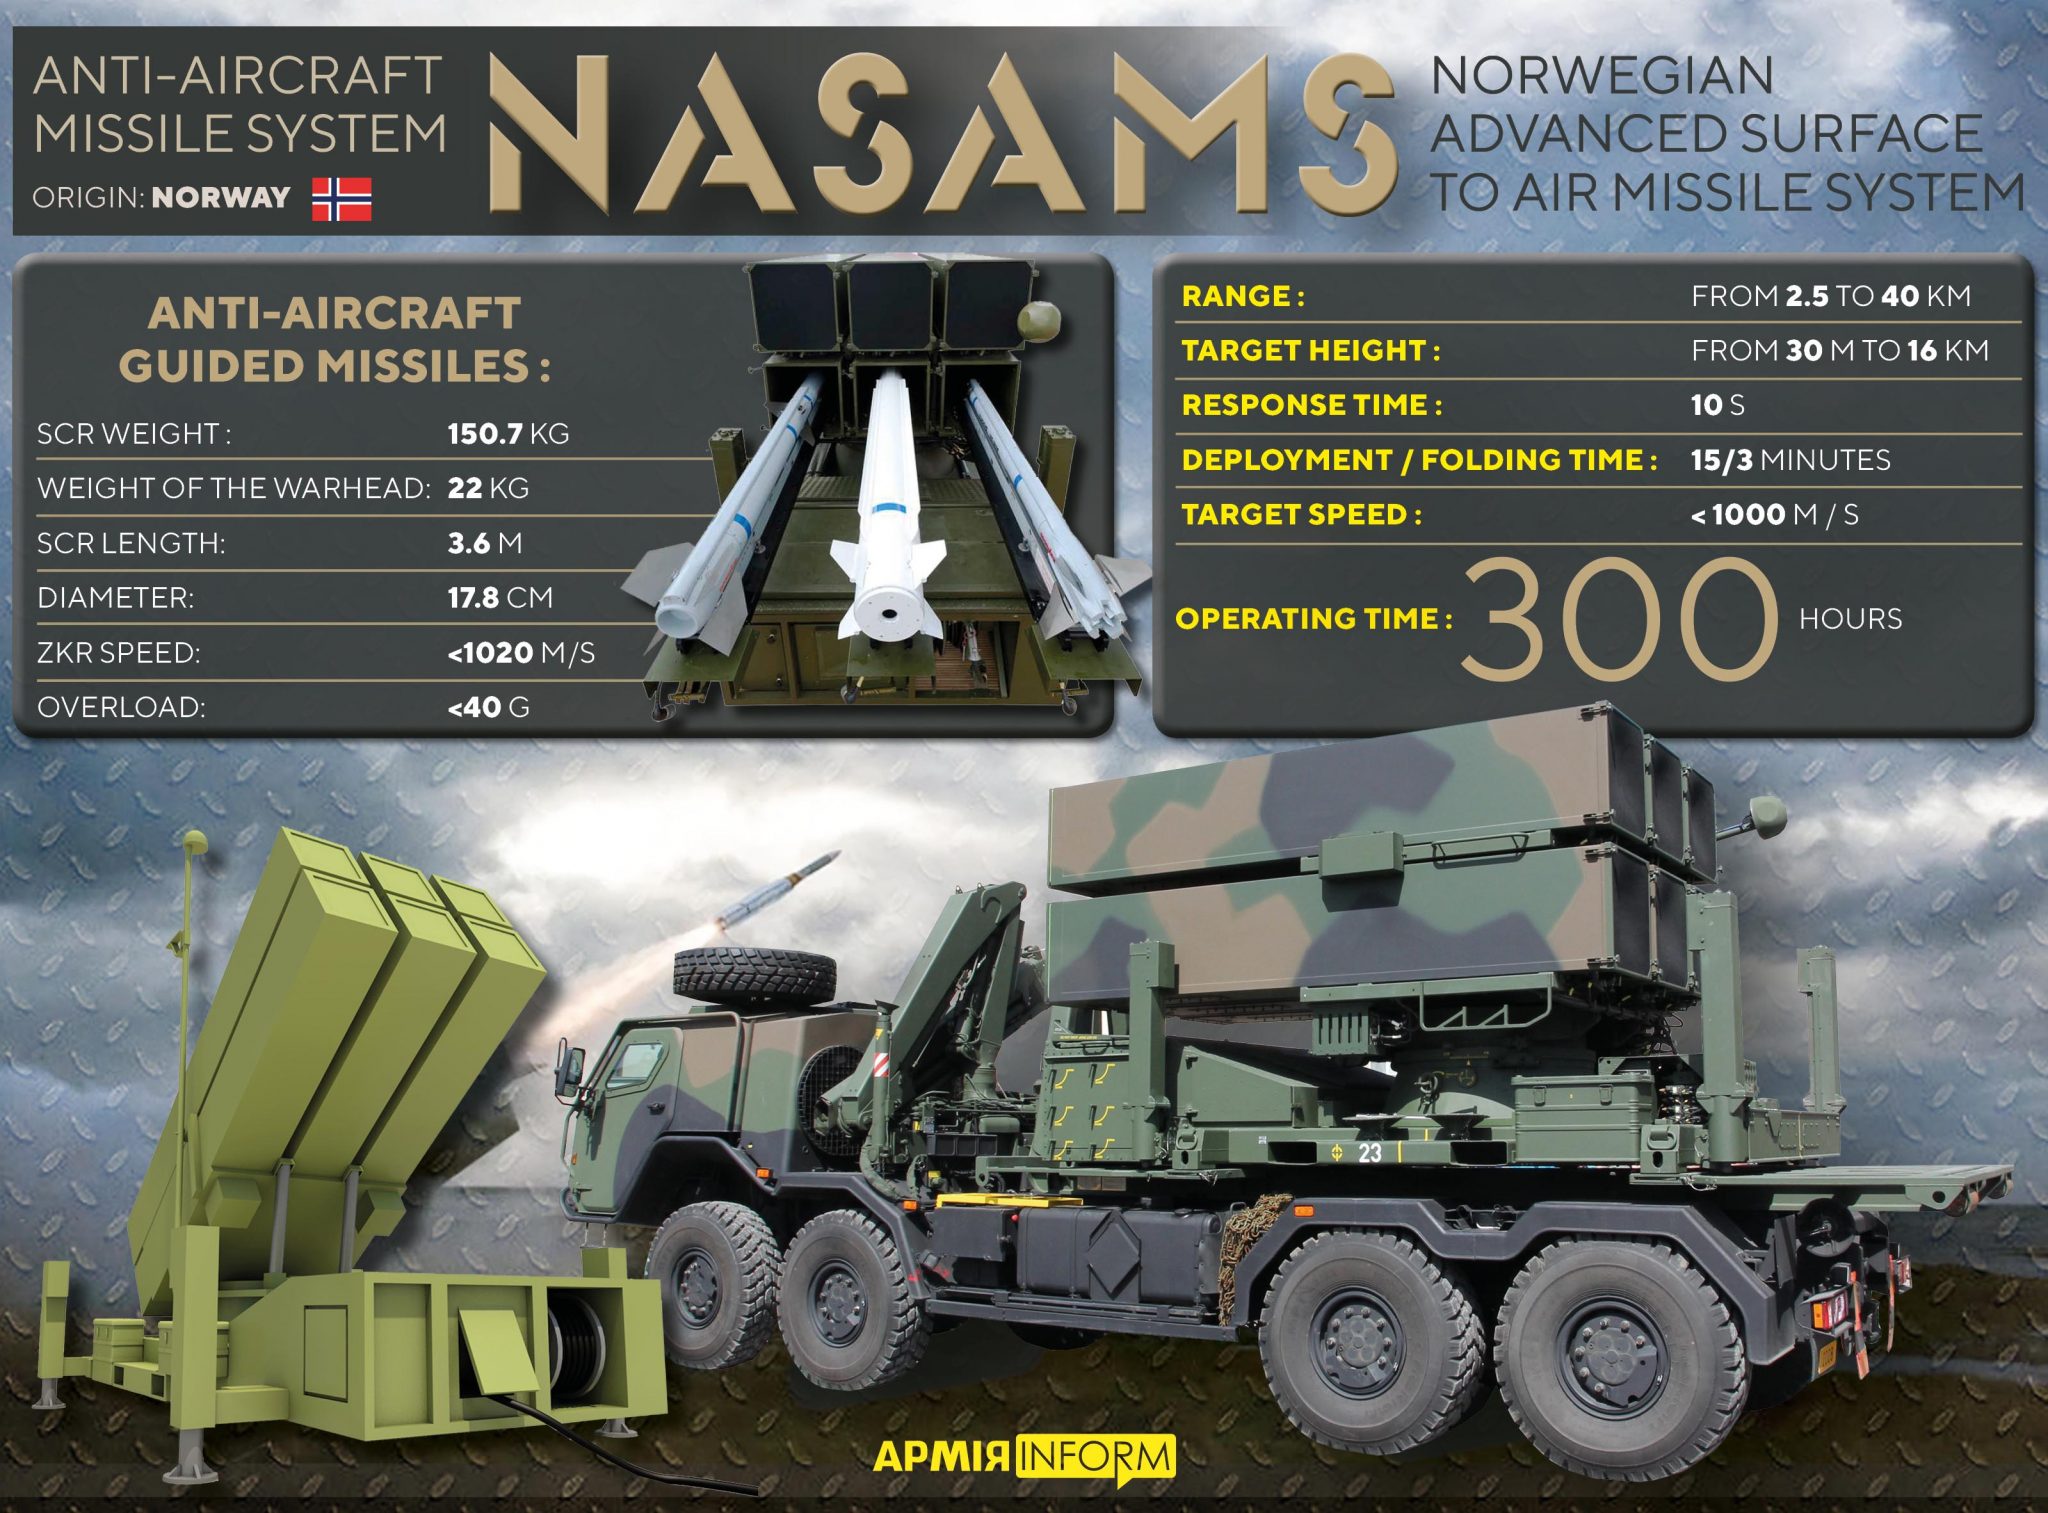 ArmyInform on Twitter: "NASAMS (National/#Norwegian Advanced Surface to Air Missile System) is a distributed and networked medium to long range surface-to-air missile defense system. #NASAMS was the first surface-based application for the